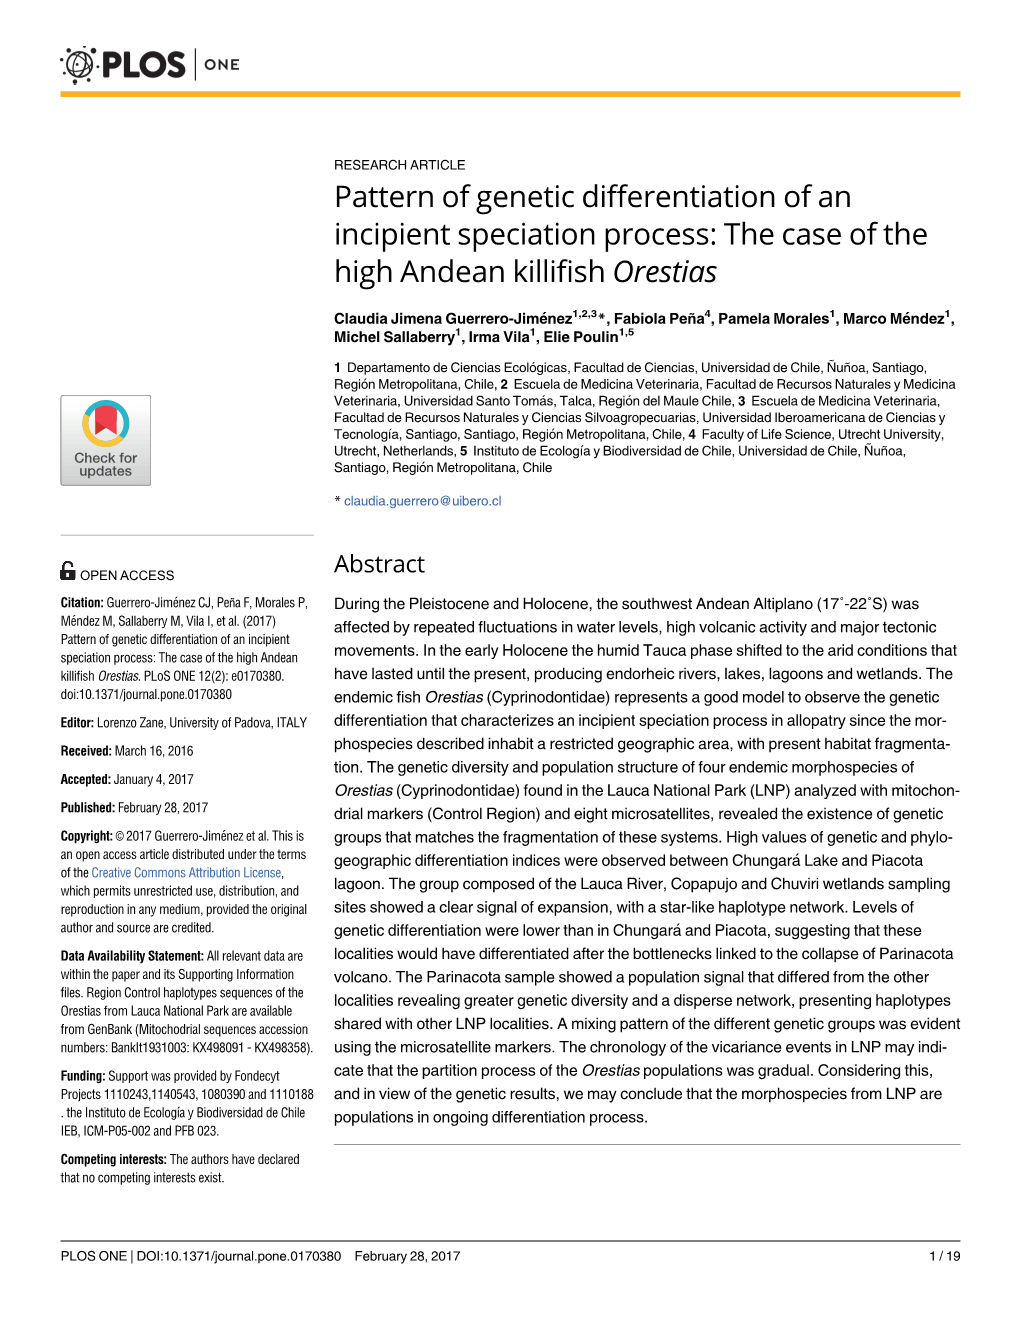 Pattern of Genetic Differentiation of an Incipient Speciation Process: the Case of the High Andean Killifish Orestias